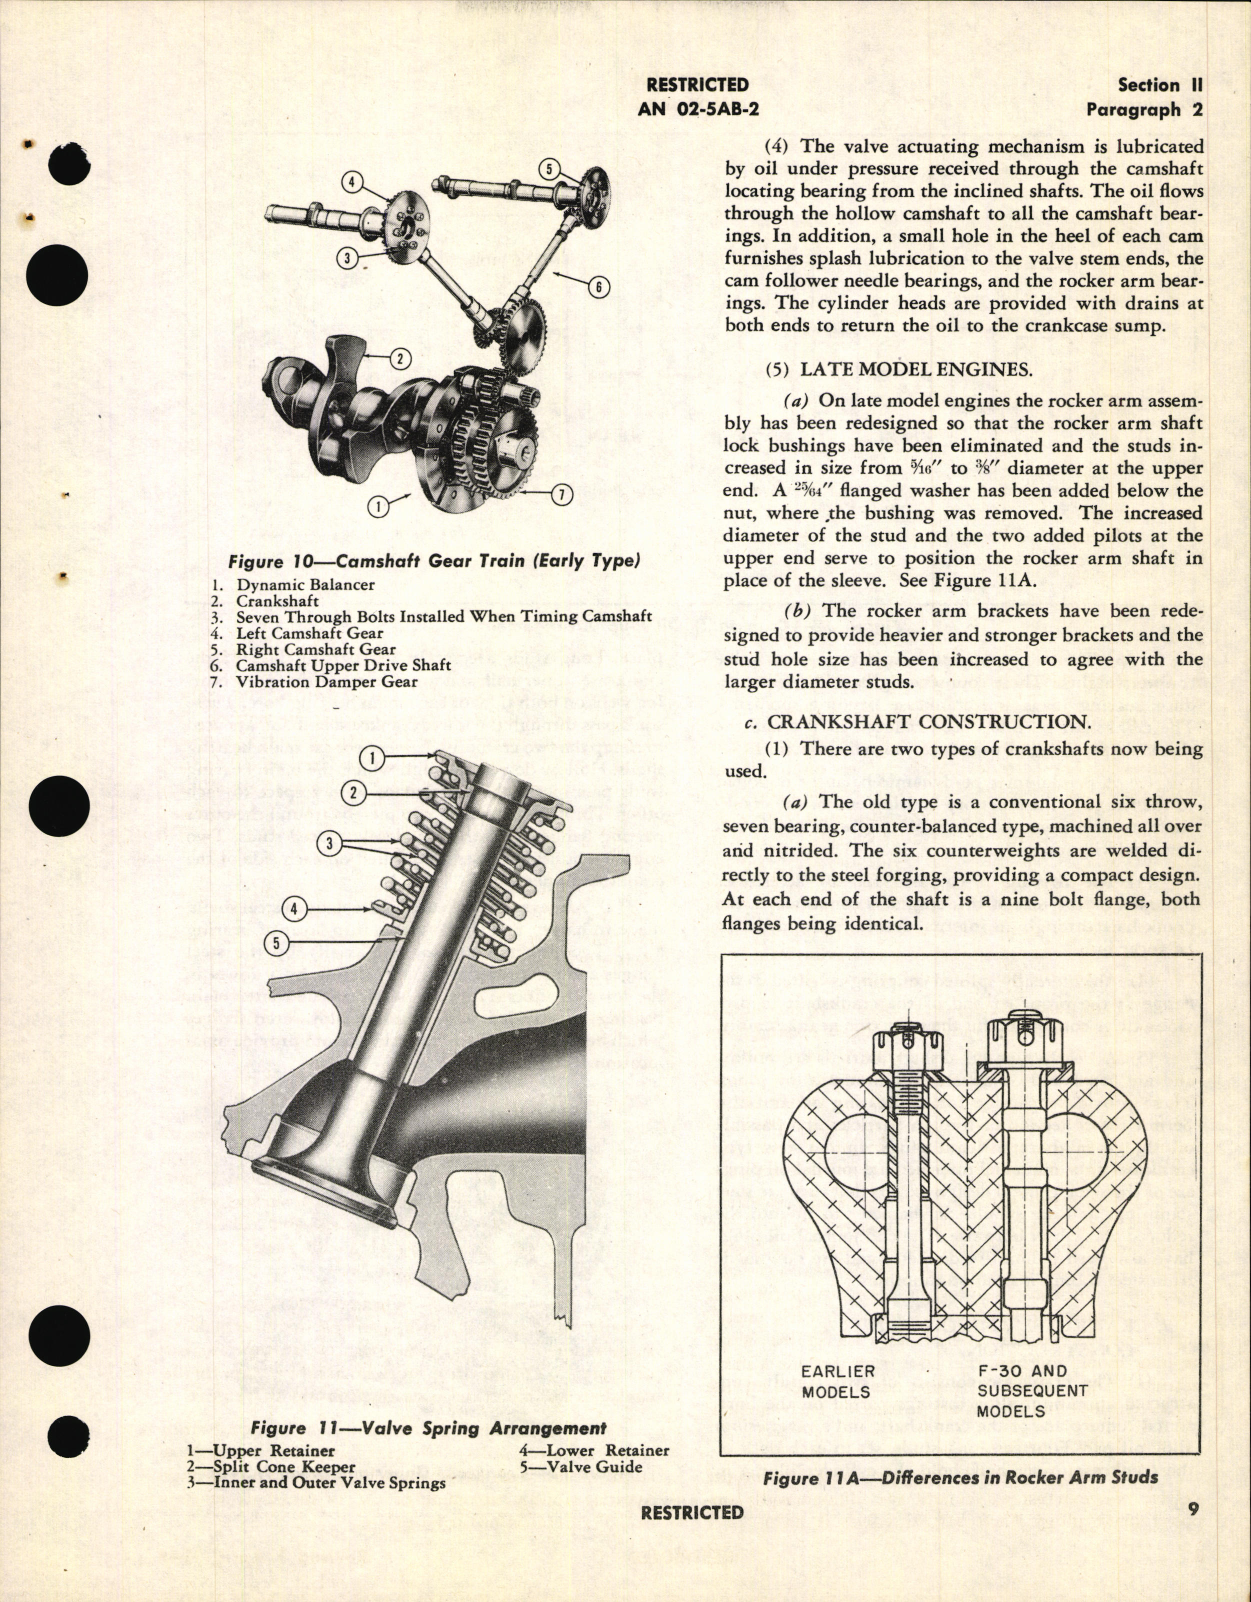 Sample page 19 from AirCorps Library document: Service Instructions for V-1710-27 thru -115 Aircraft Engines